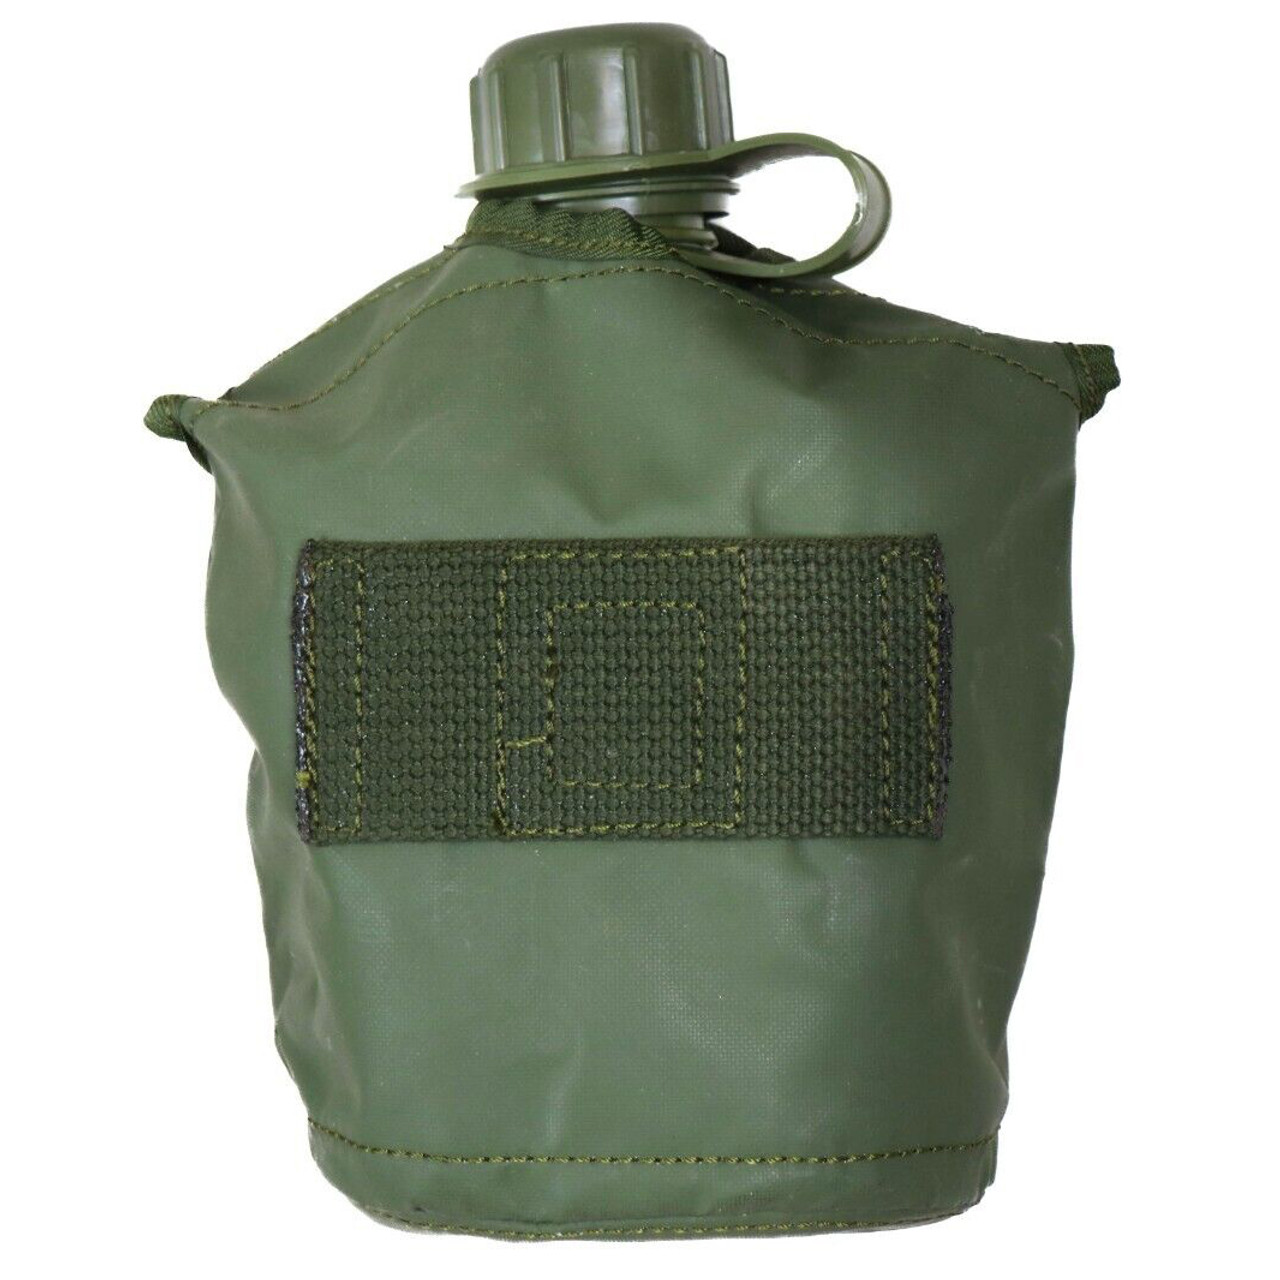 Belgian Army Canteen With Cover - used